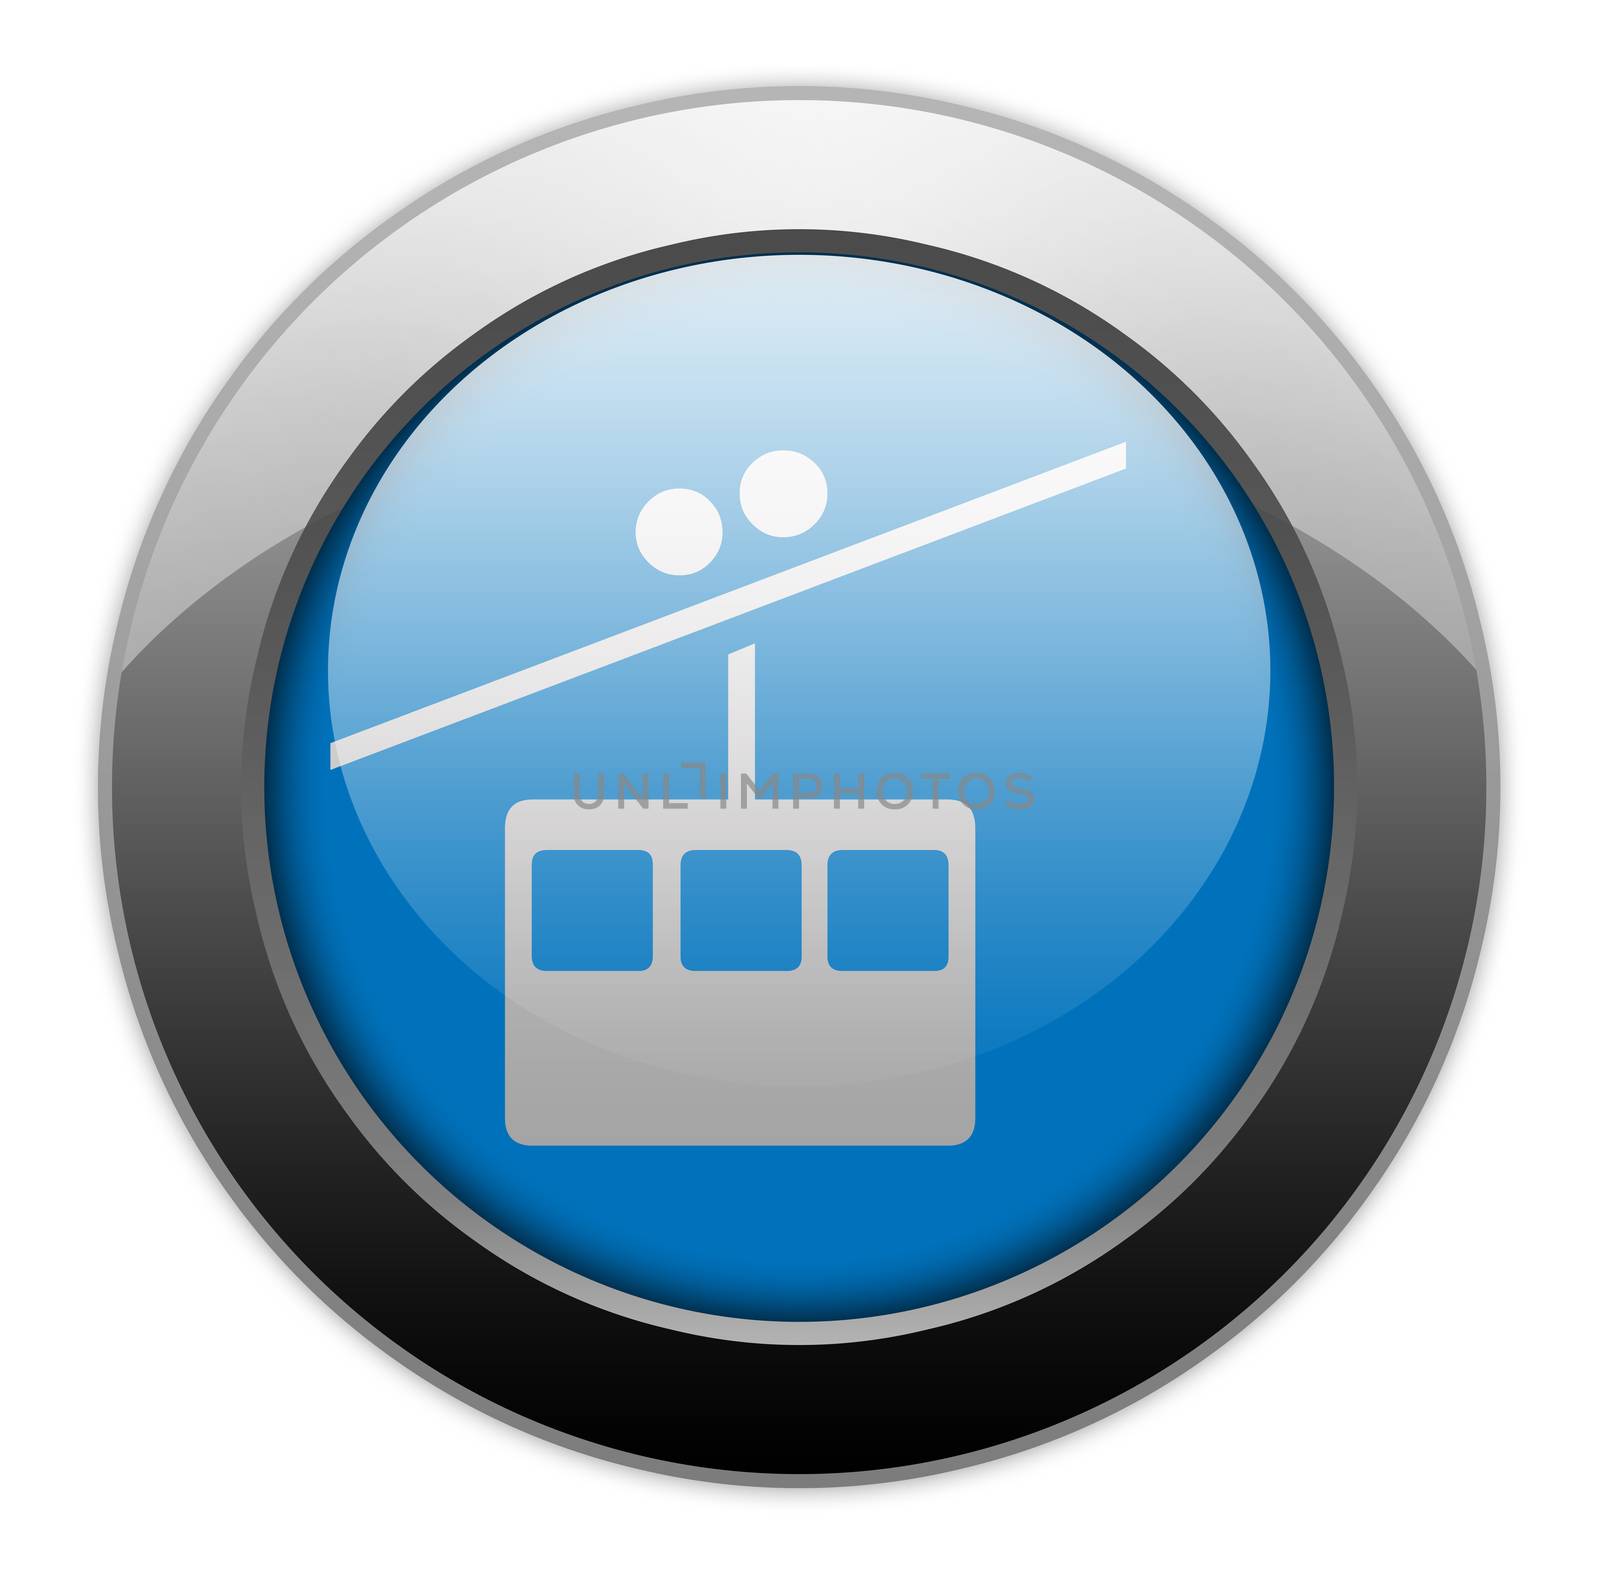 Icon, Button, Pictogram Aerial Tramway by mindscanner